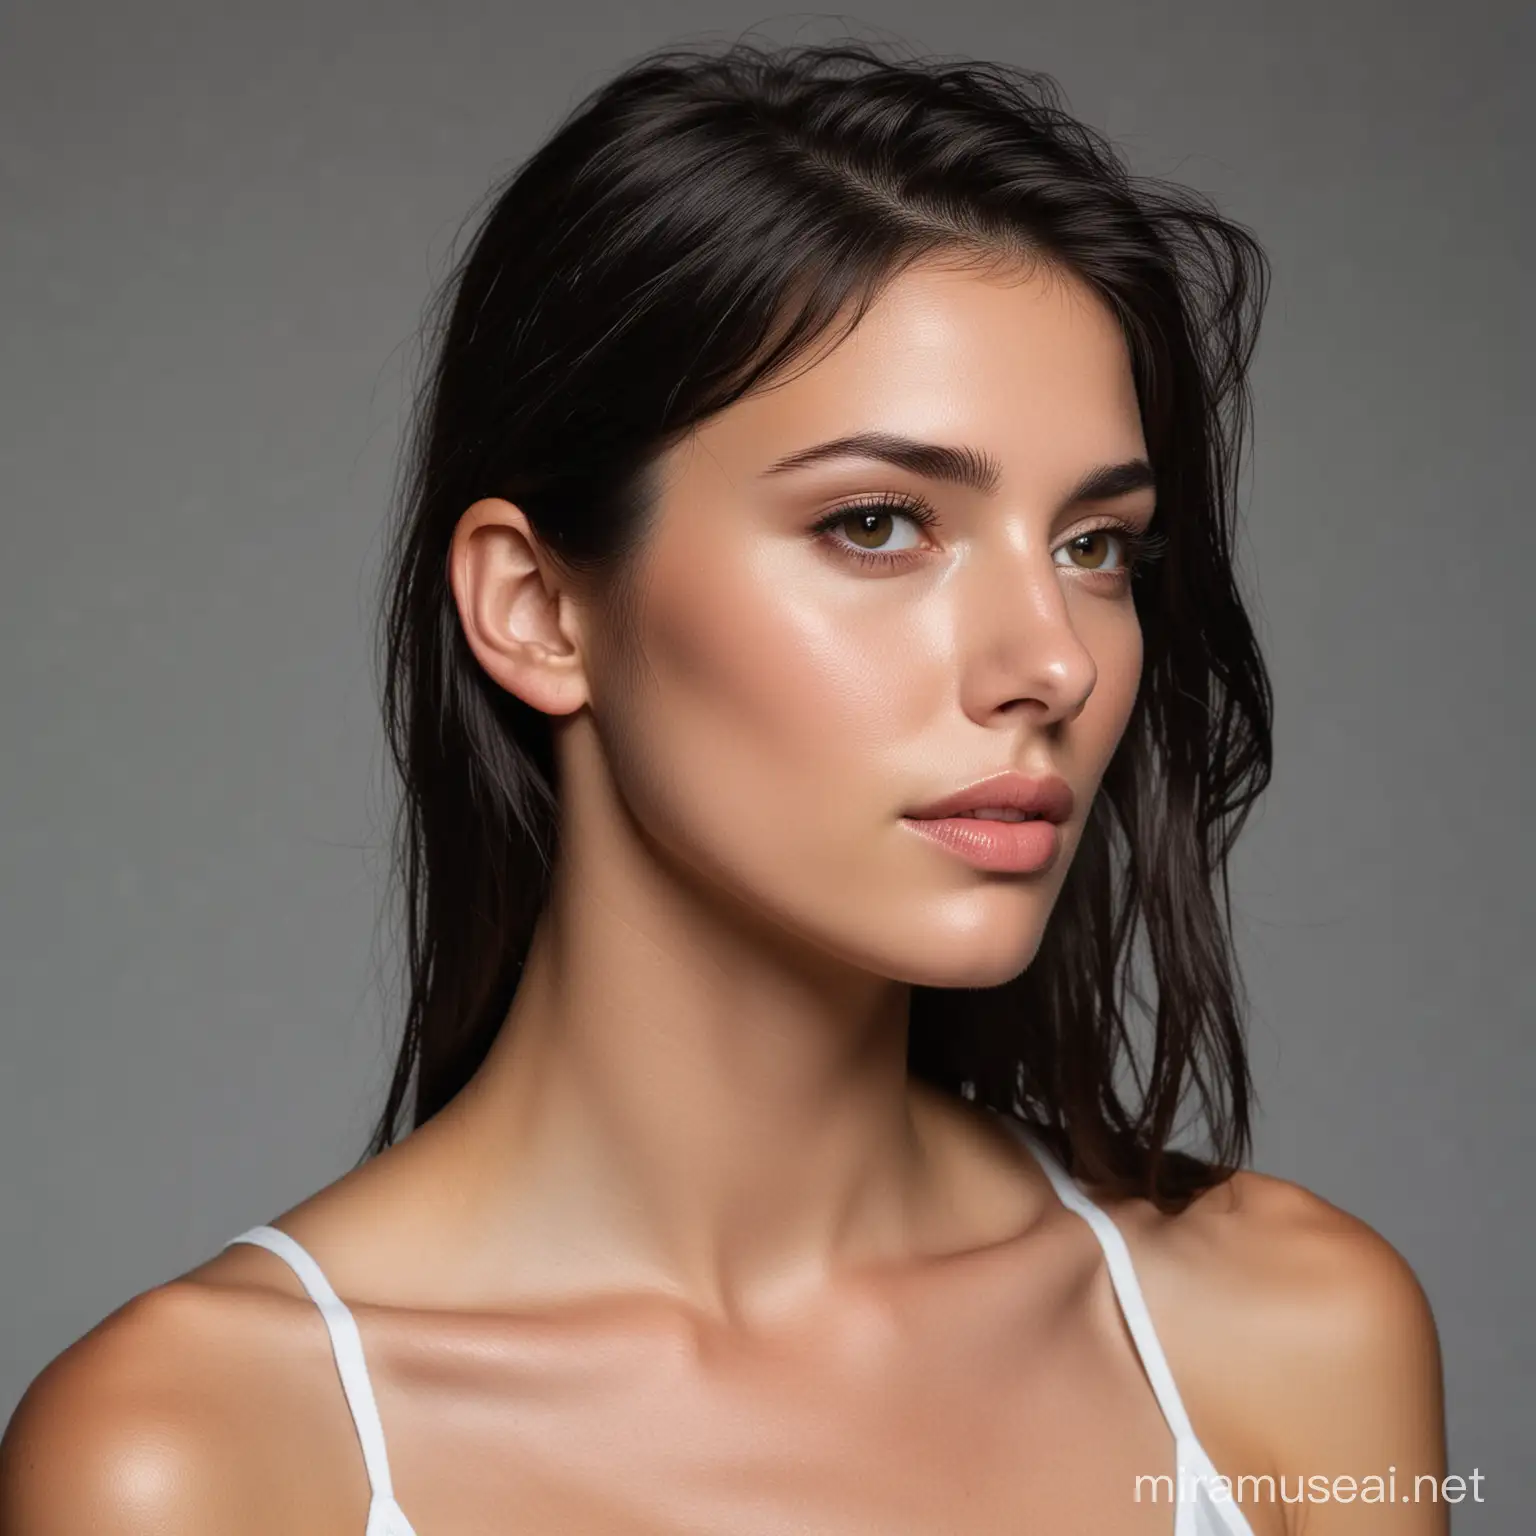 Natural Beauty European and American Female Model with Dark Hair and Detailed Facial Features